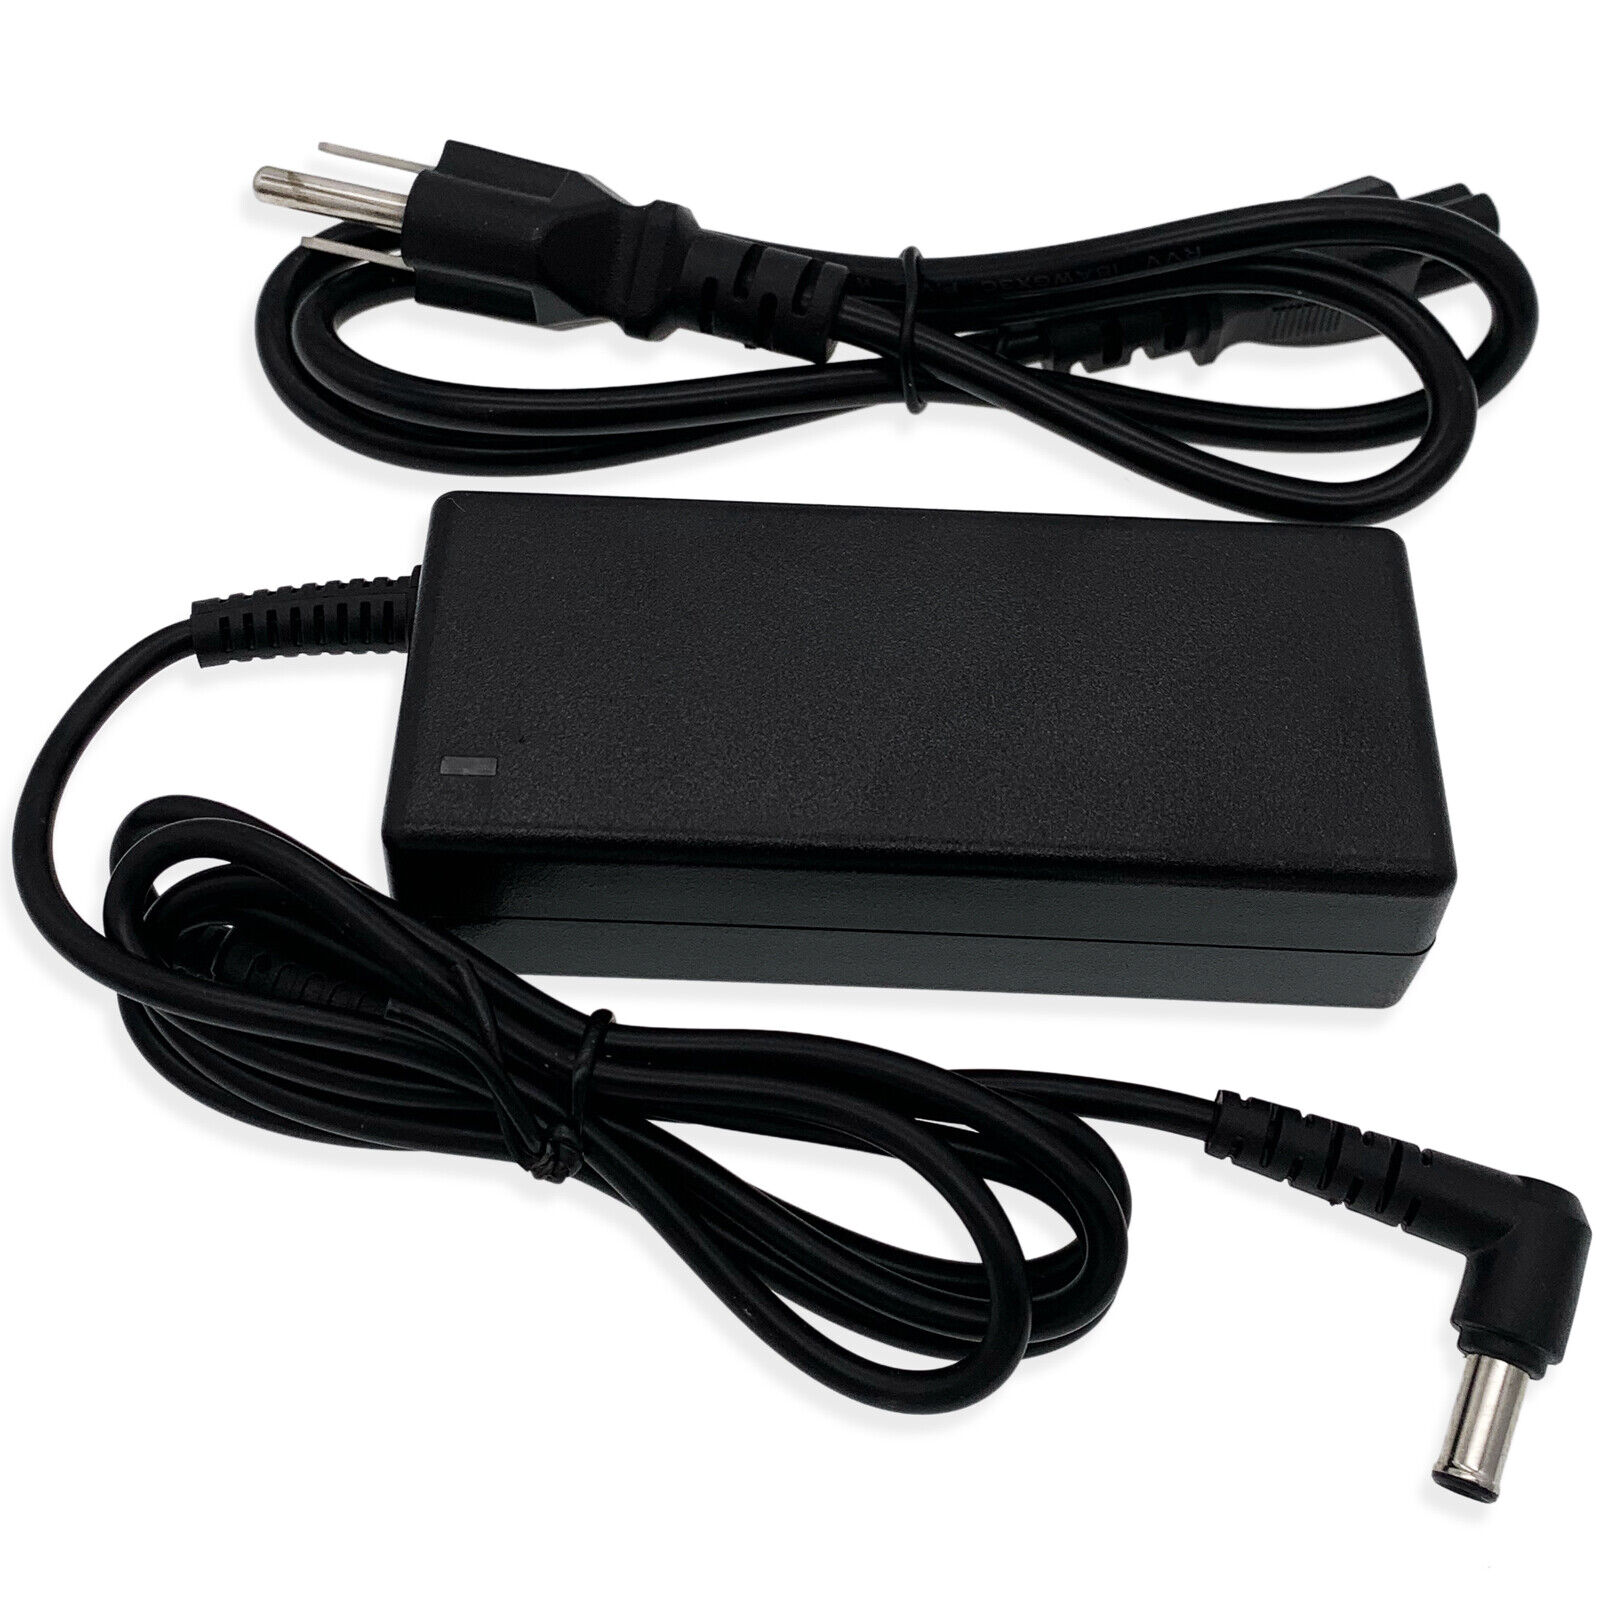 AC Adapter For Samsung CF390 C24F390FHN LC24F390FHNXZA Monitor Power Supply Cord